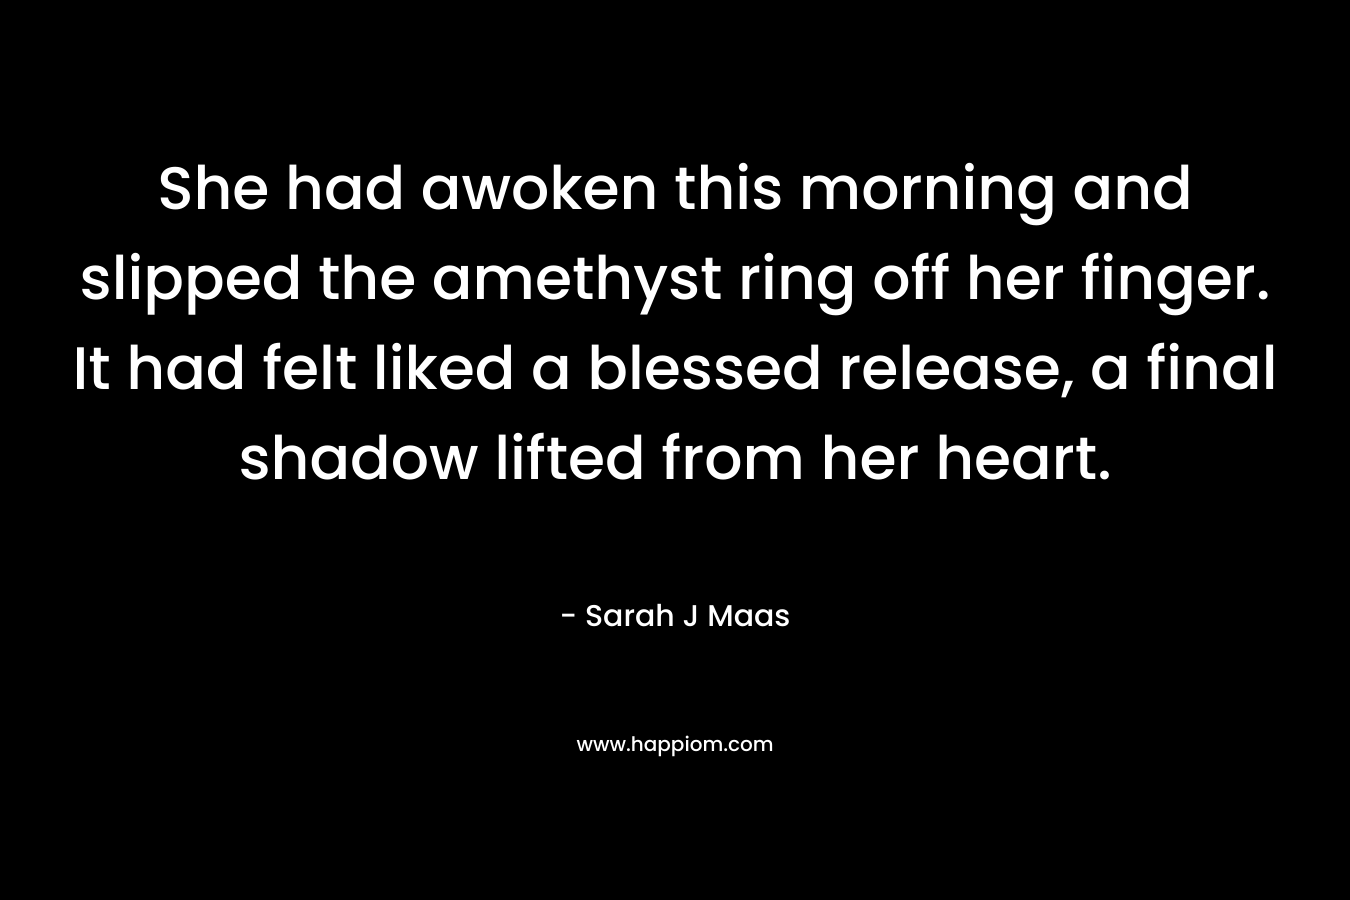 She had awoken this morning and slipped the amethyst ring off her finger. It had felt liked a blessed release, a final shadow lifted from her heart.